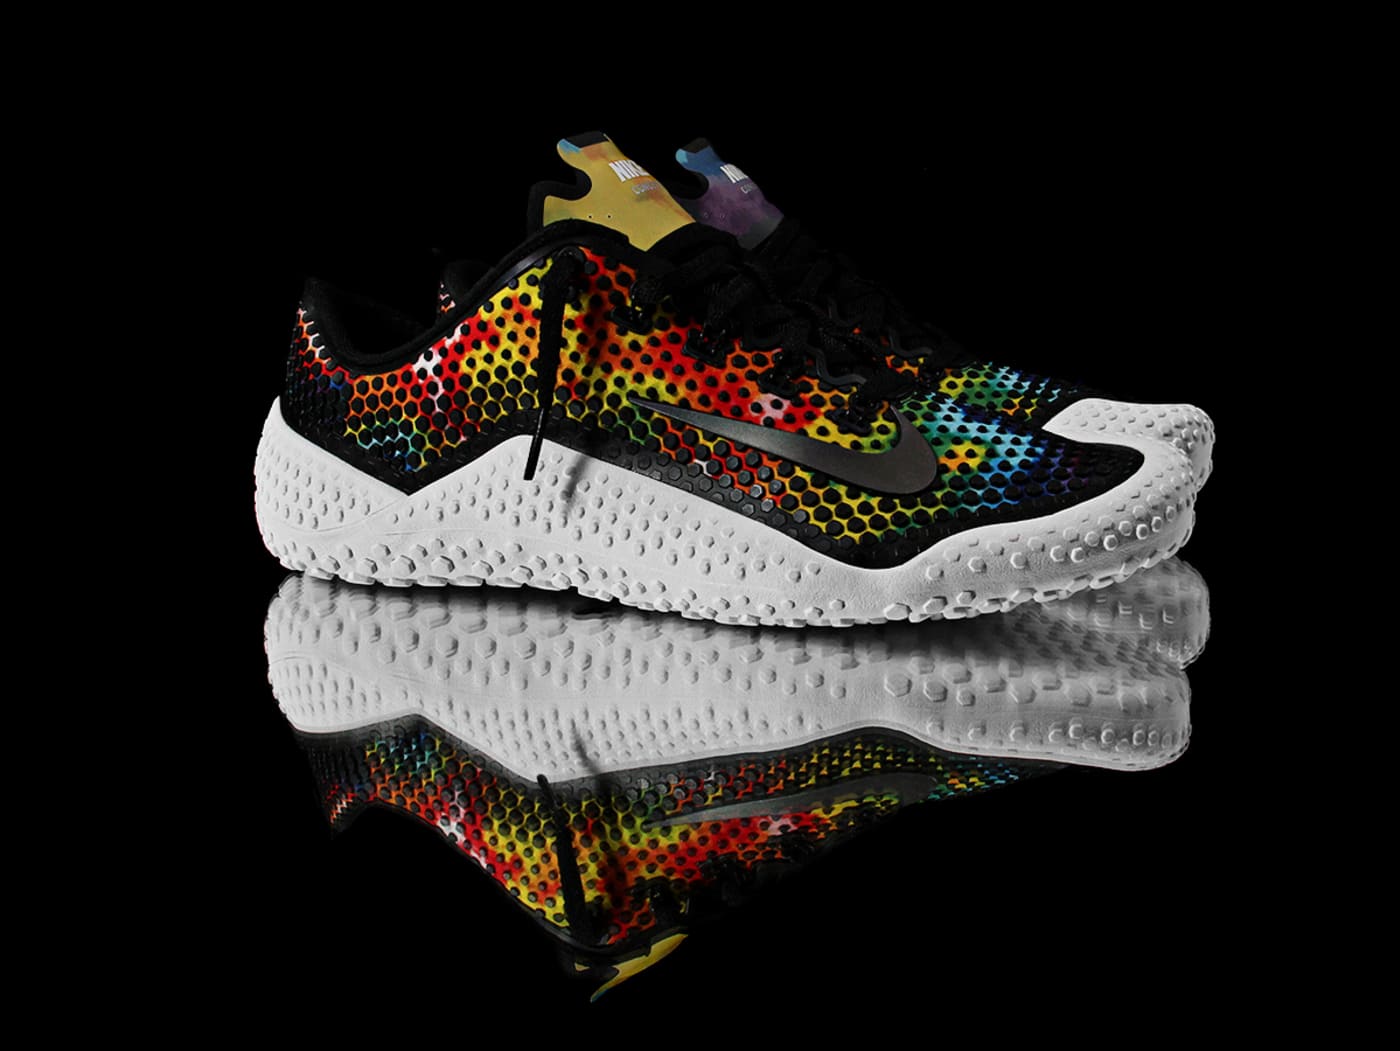 Concepts x Nike Free Trainer 1.0 "Thermal"